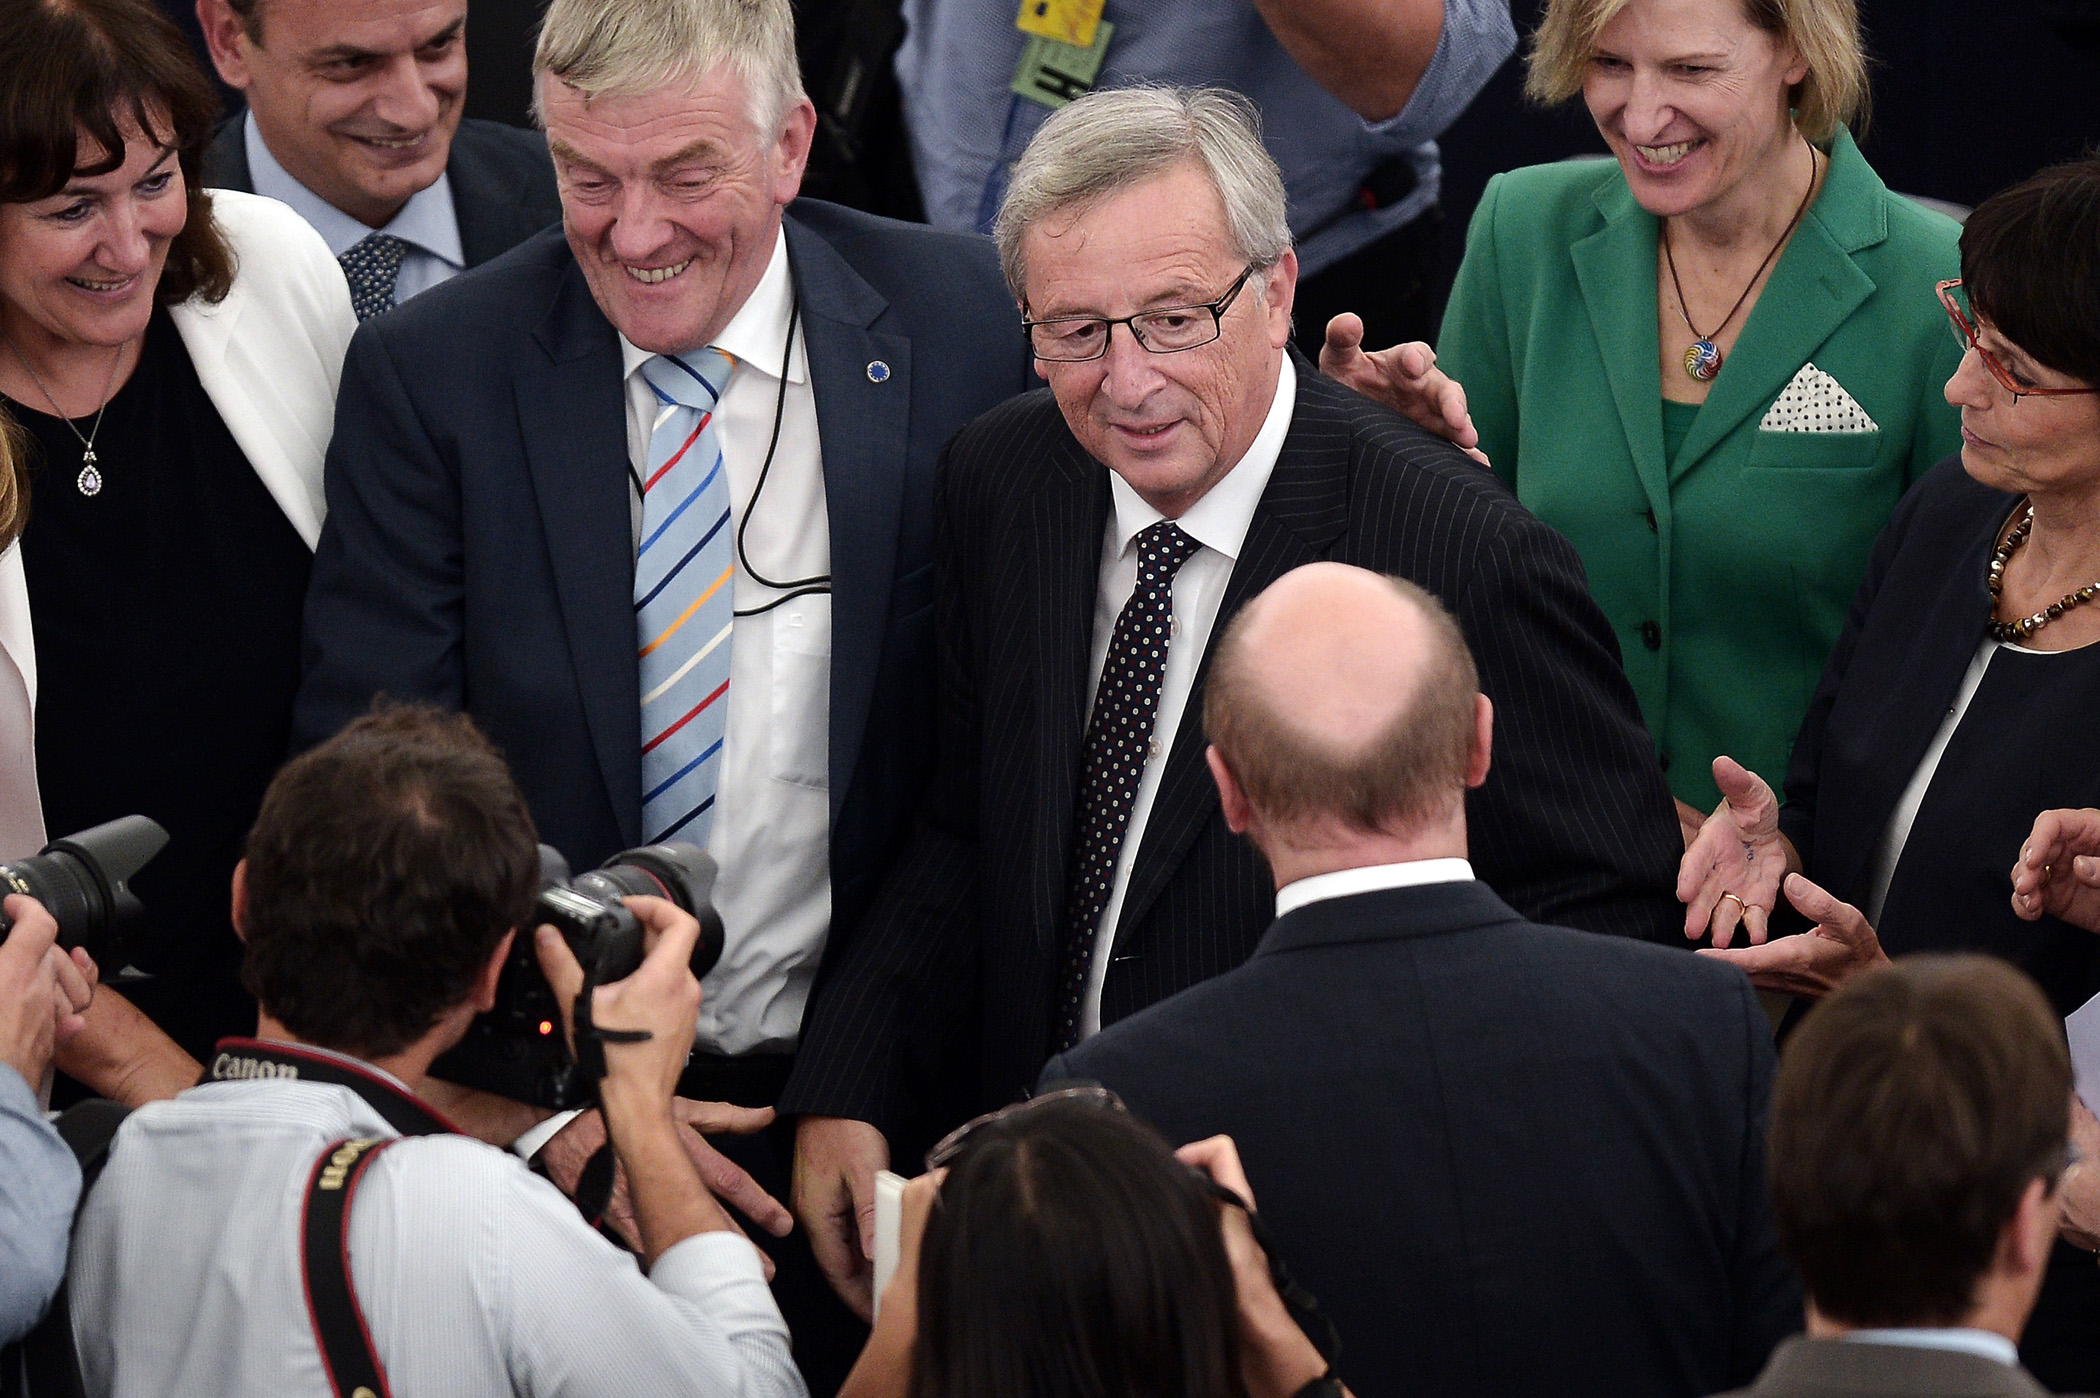 Newly elected President of the European Commission, Jean-Claude Juncker is congratulated  on July 15, 2014, in the European Parliament in Strasbourg, France. (Frederick Florin—AFP/Getty Images)